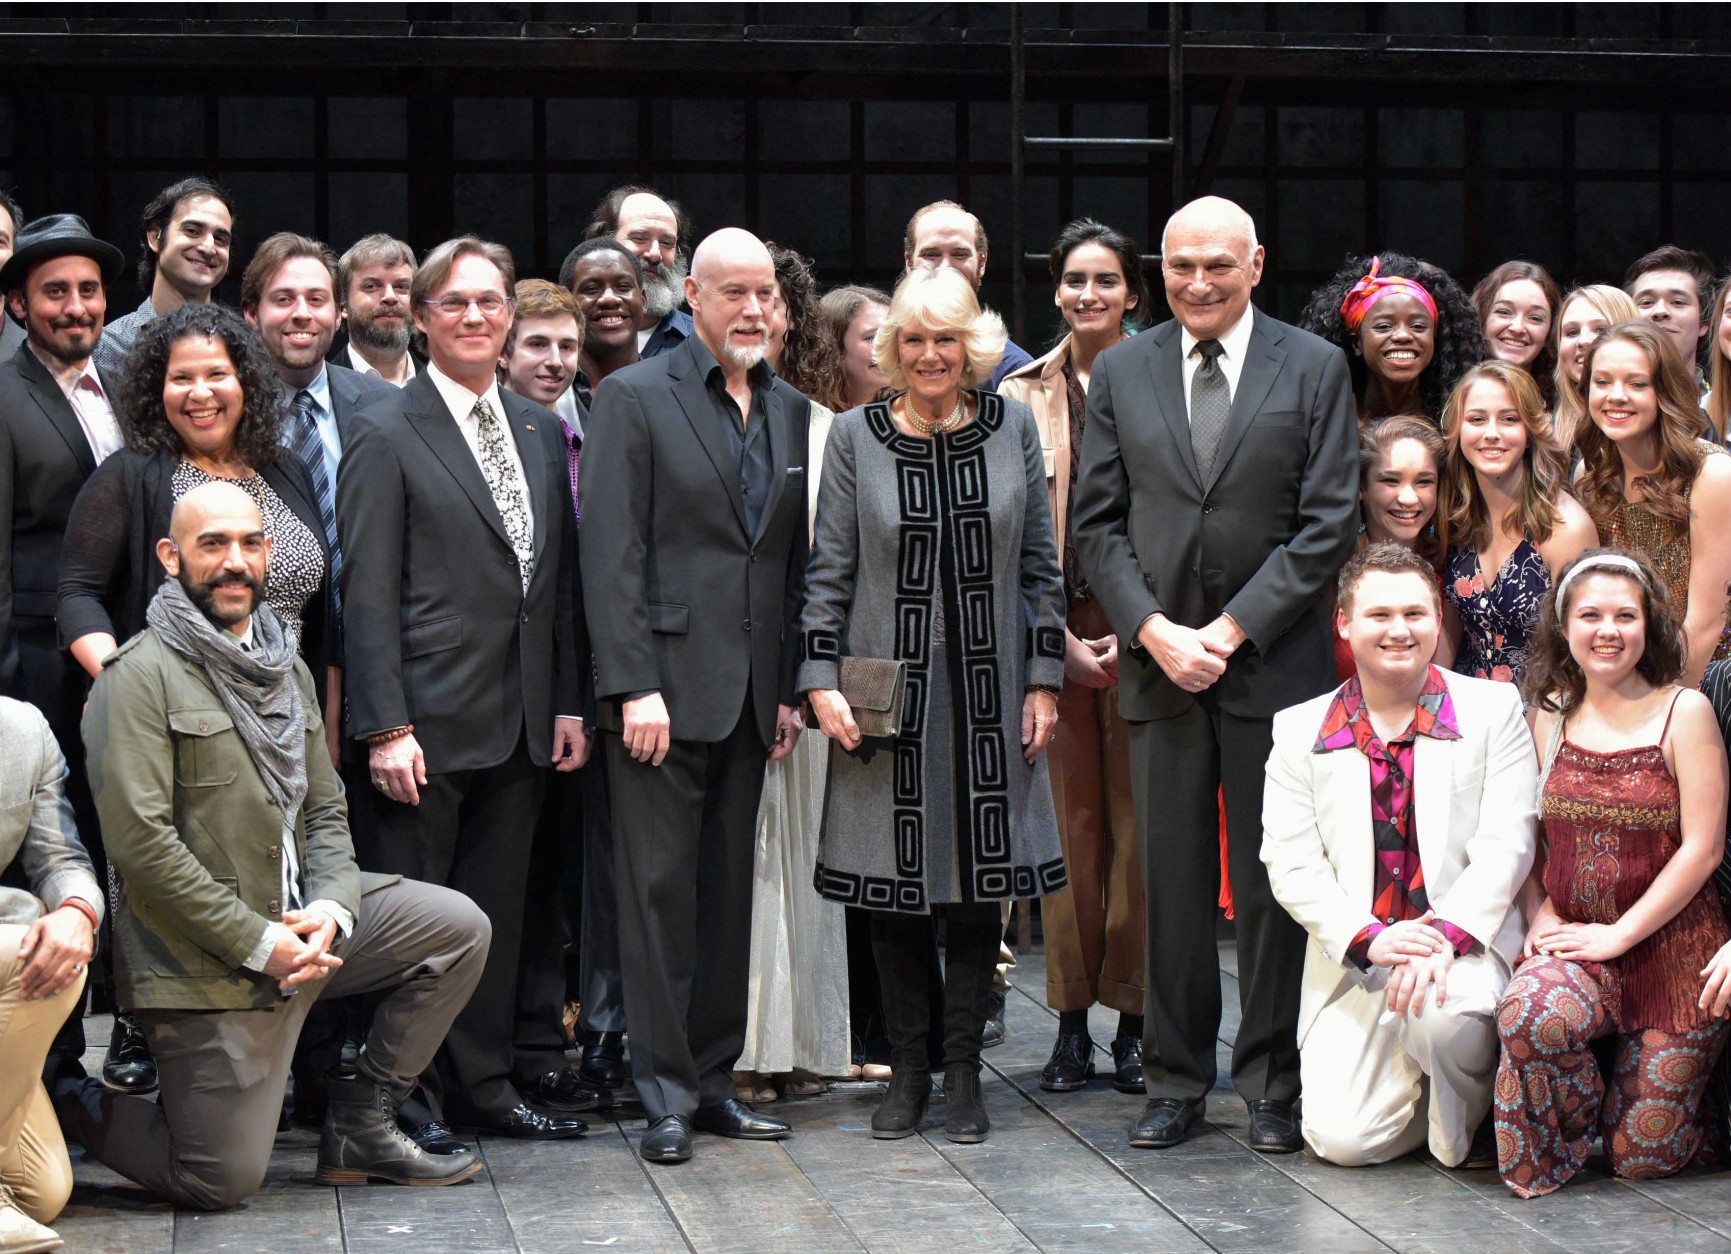 Camilla, the Duchess of Cornwall, Australian actor Anthony Warlow, center left, and Shakespeare Theatre Company artistic director Michael Kahn, center right, pose for a photograph during a visit to the Shakespeare Theatre Company at Sidney Harman Hall on Wednesday, March 18, 2015 in Washington. (AP Photo/Mandel Ngan, Pool)